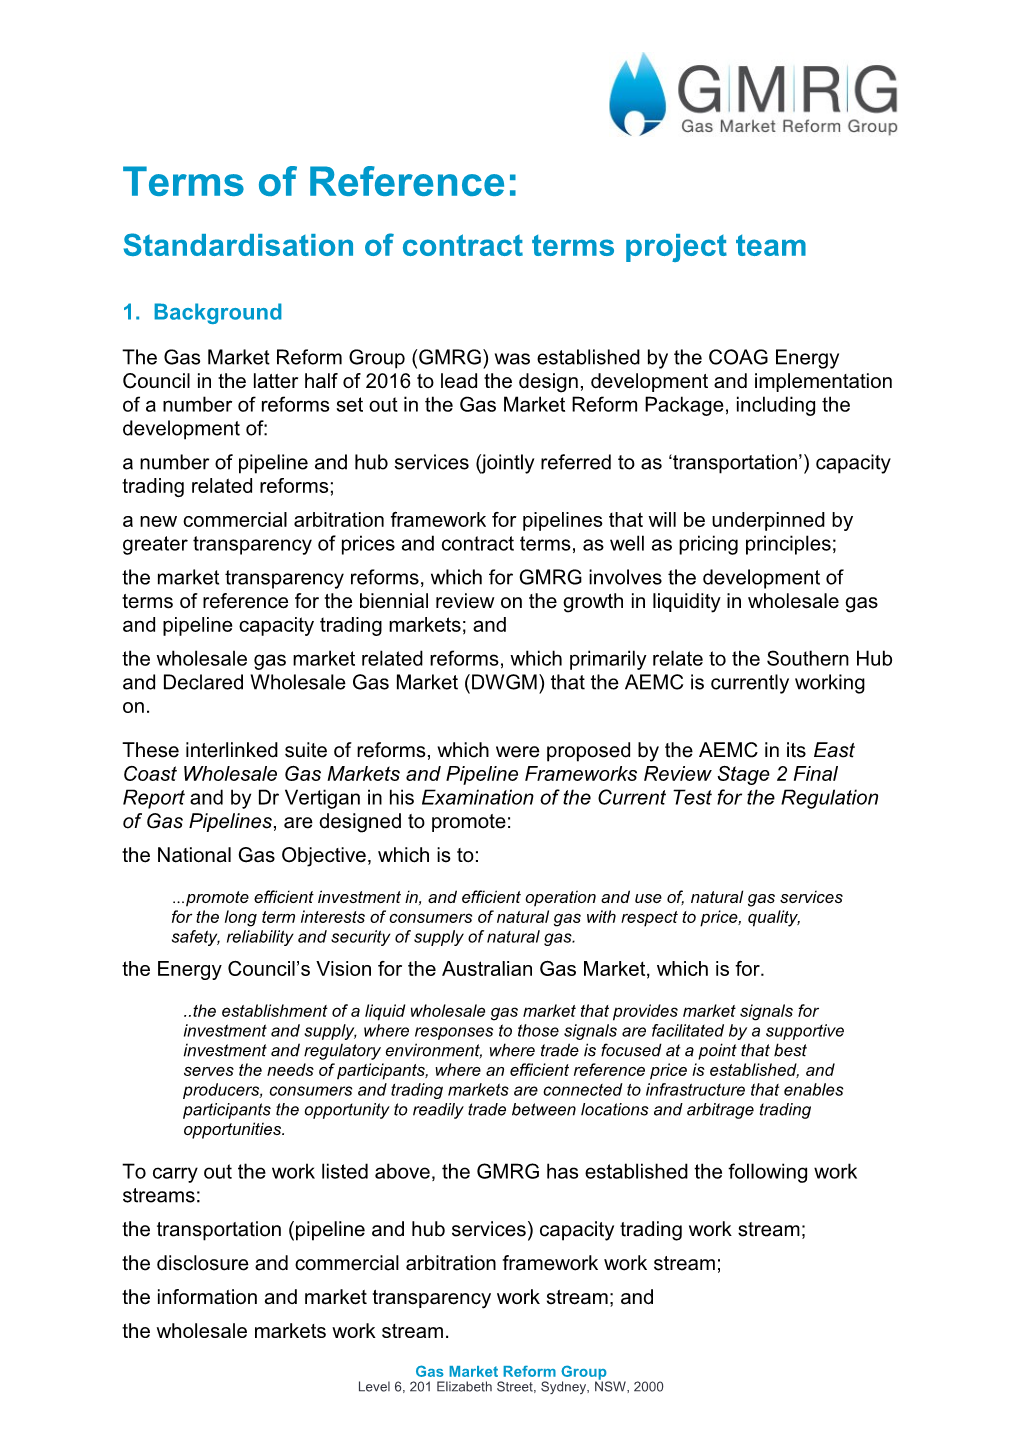 Standardisation Project Team - Terms of Reference